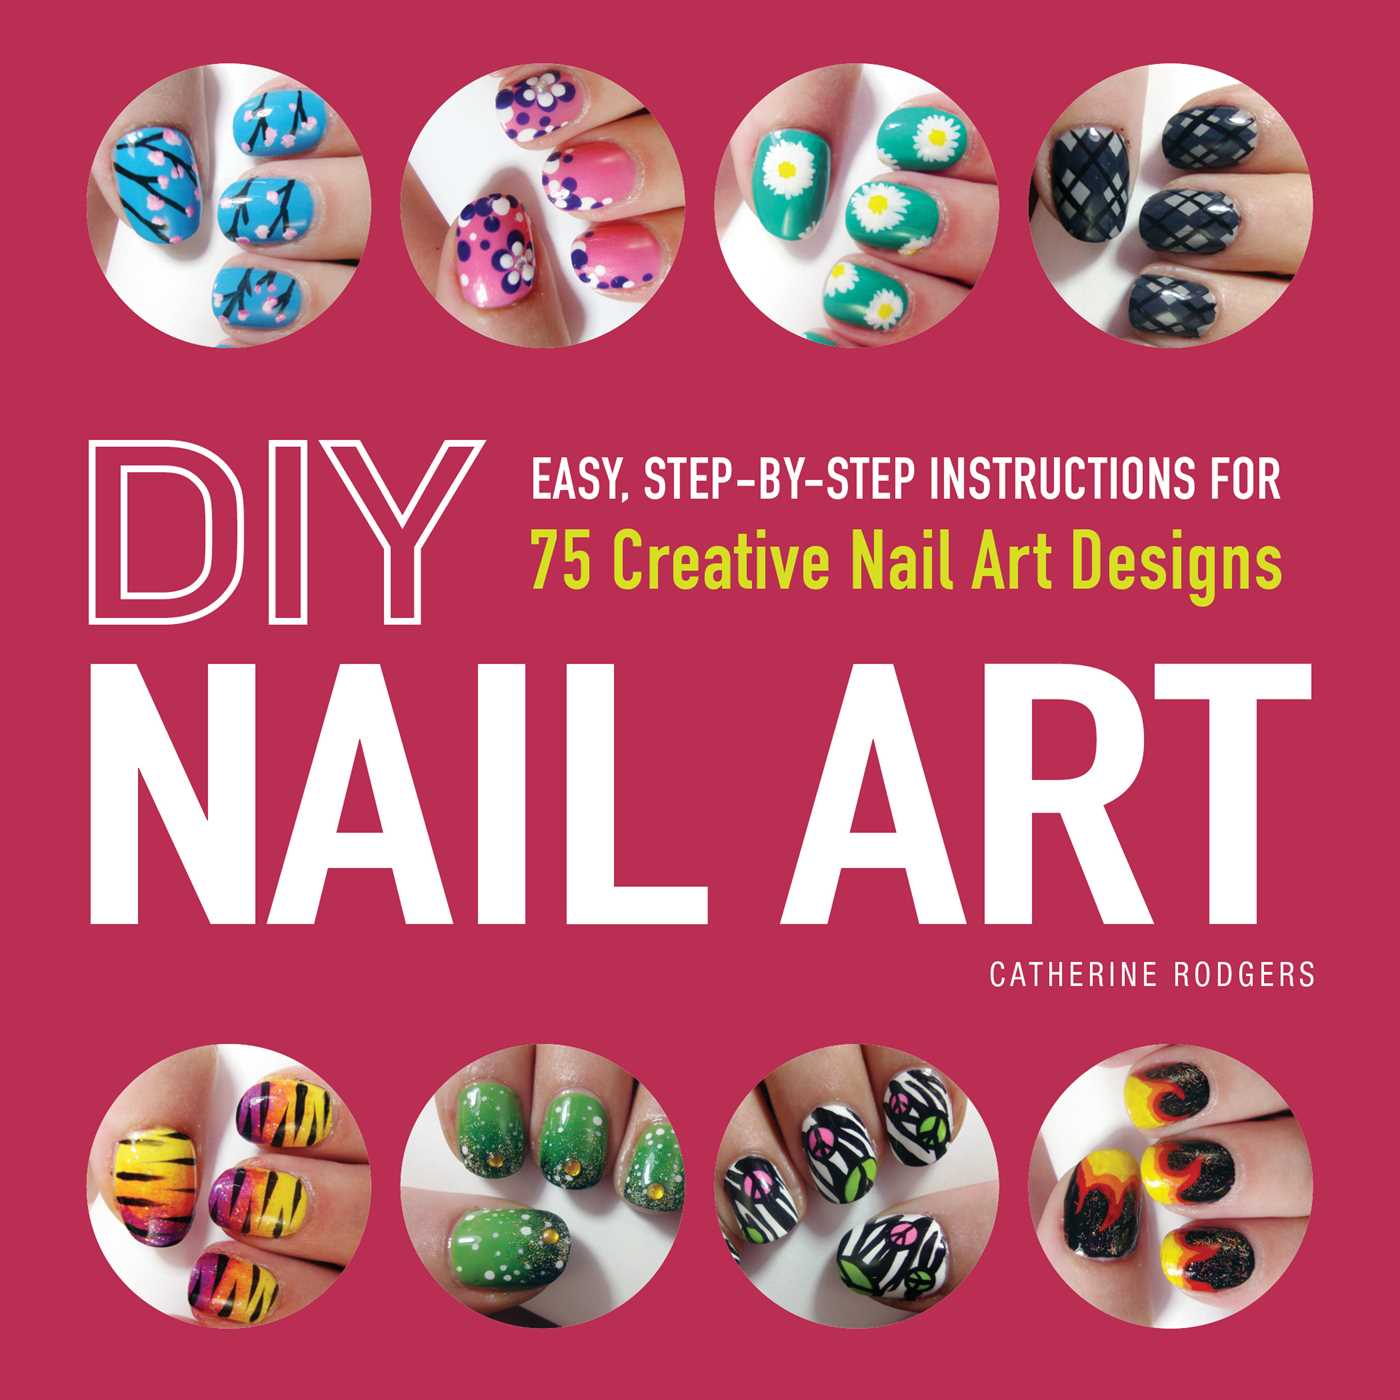 DIY Nail Art : Easy, Step-by-Step Instructions for 75 Creative Nail Art Designs